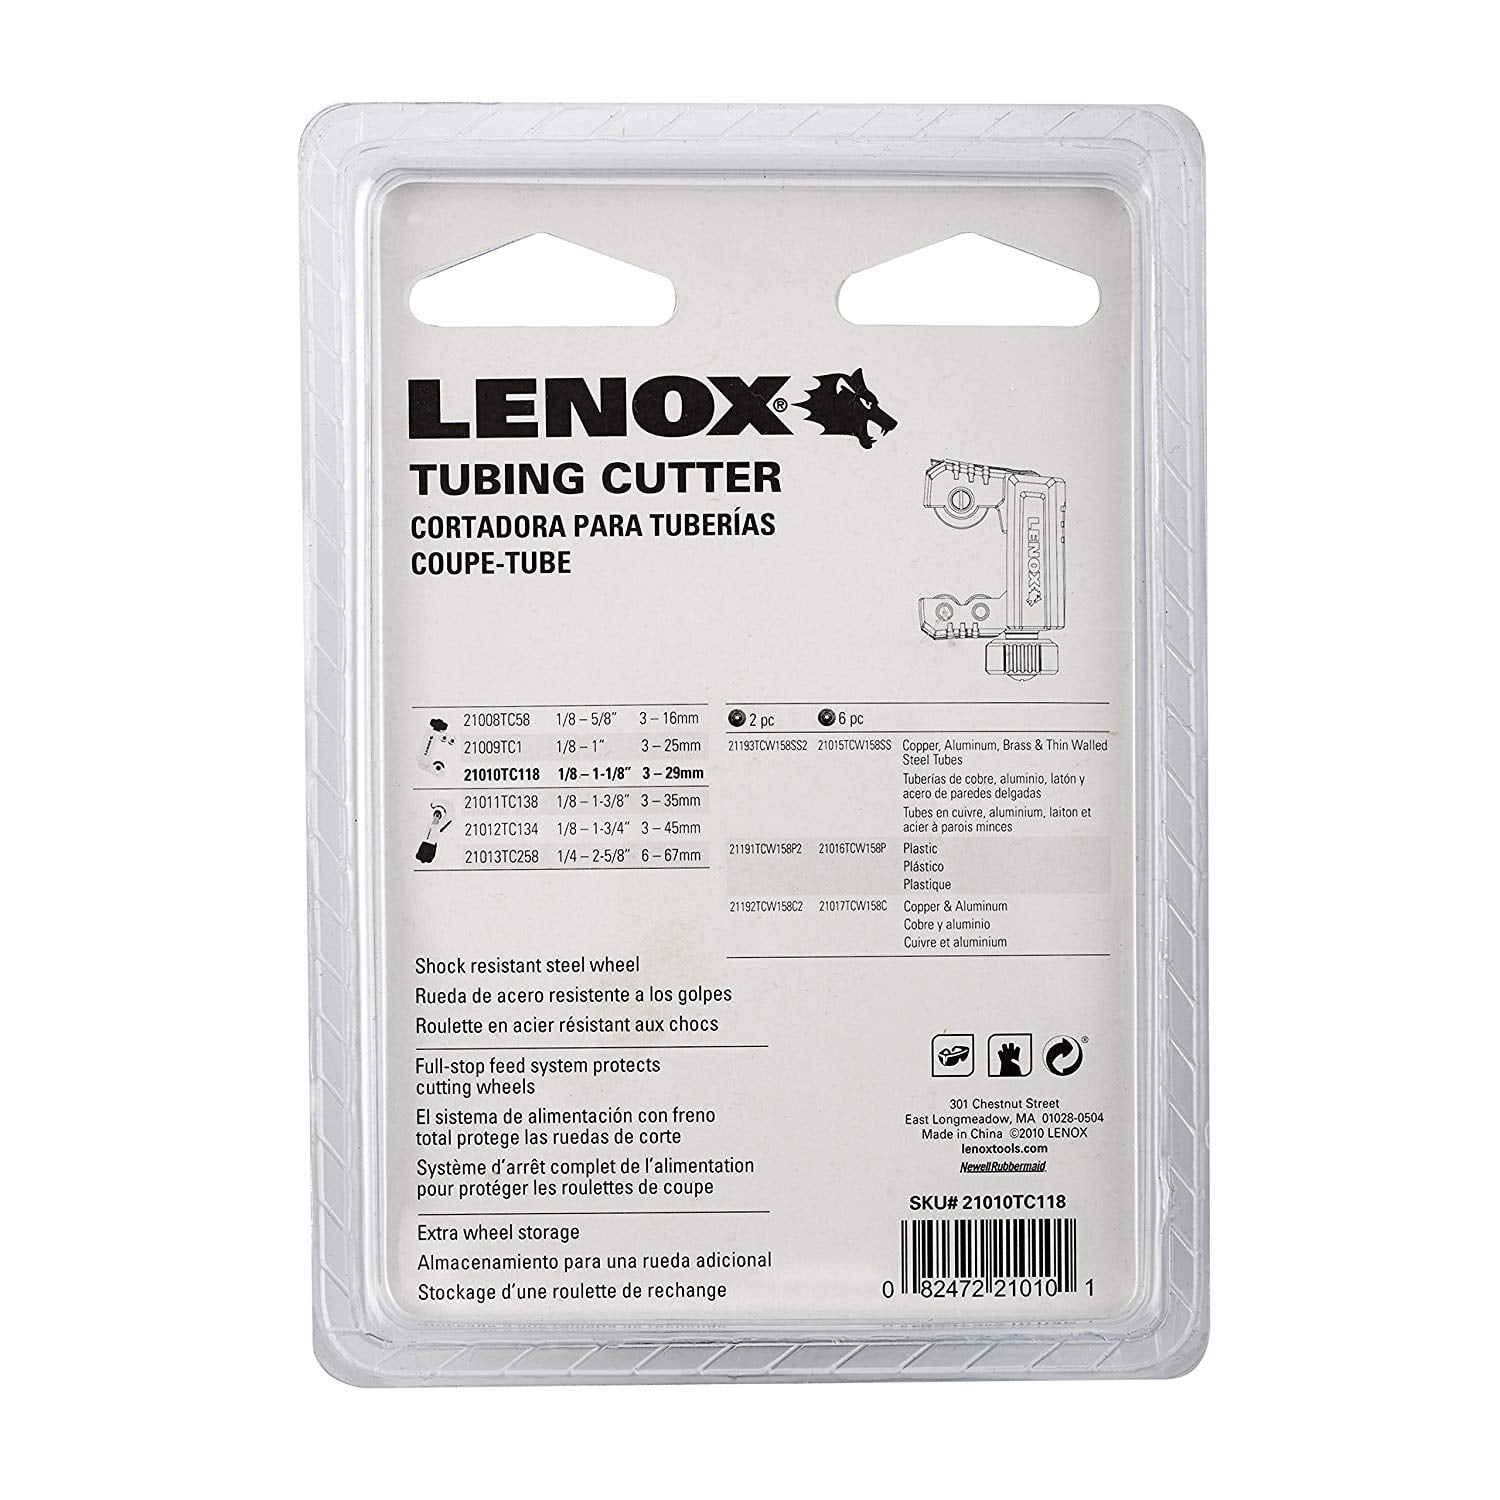 LENOX 21010-TC11/8 1/8-to-1-1/8-Inch Tubing Cutters Free Ship New 